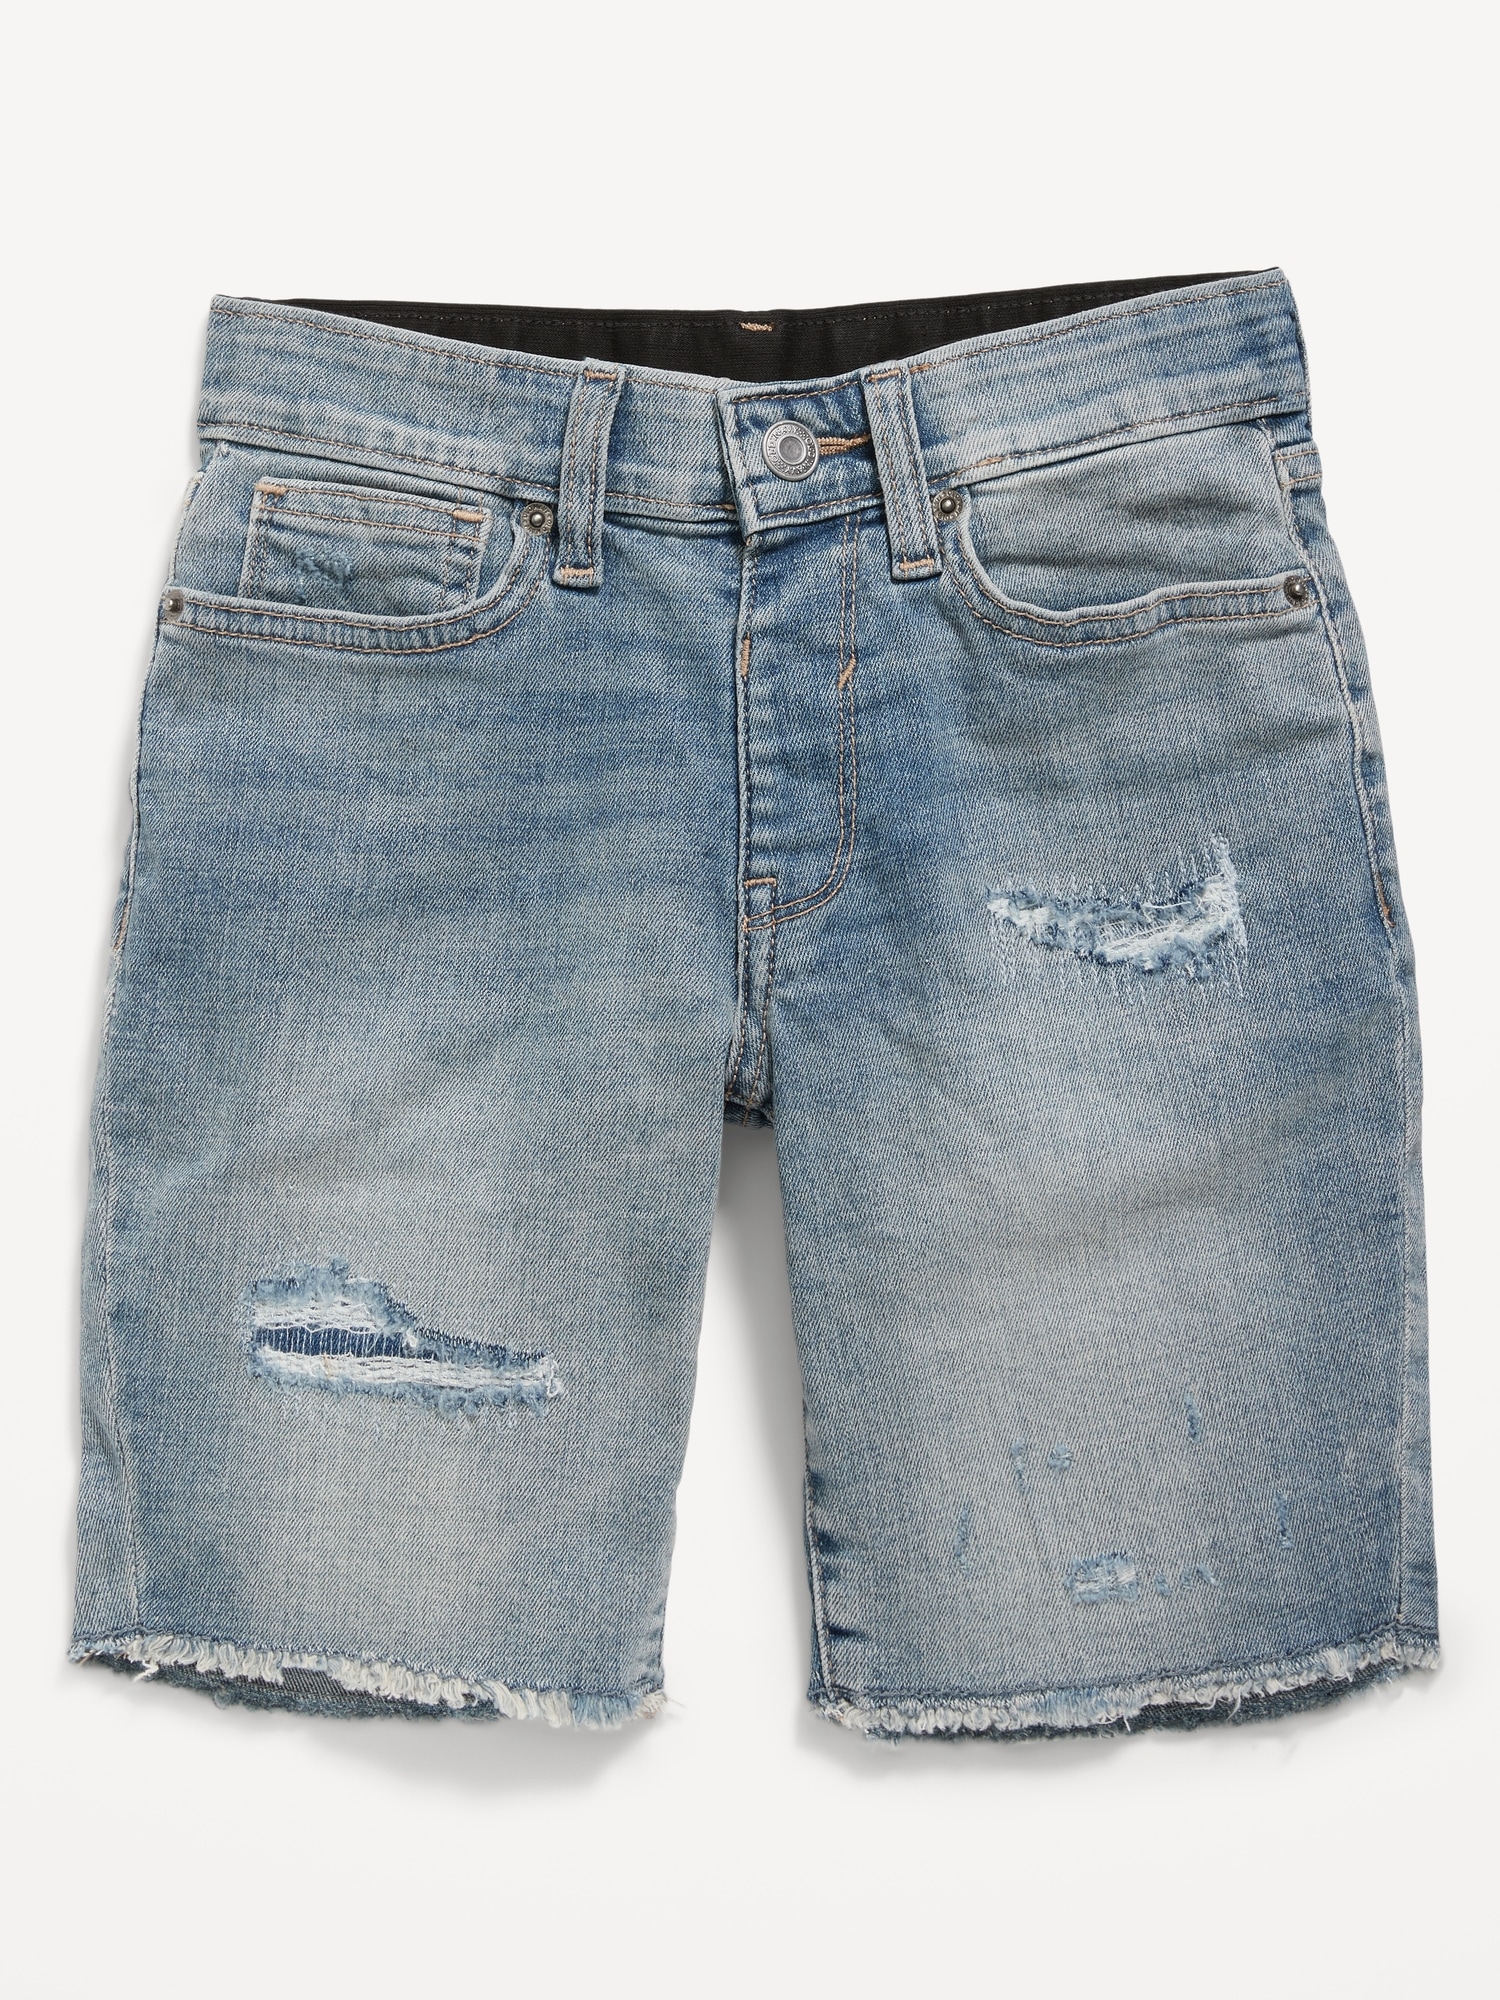 Slim 360° Stretch Ripped Cut-Off Jean Shorts for Boys | Old Navy